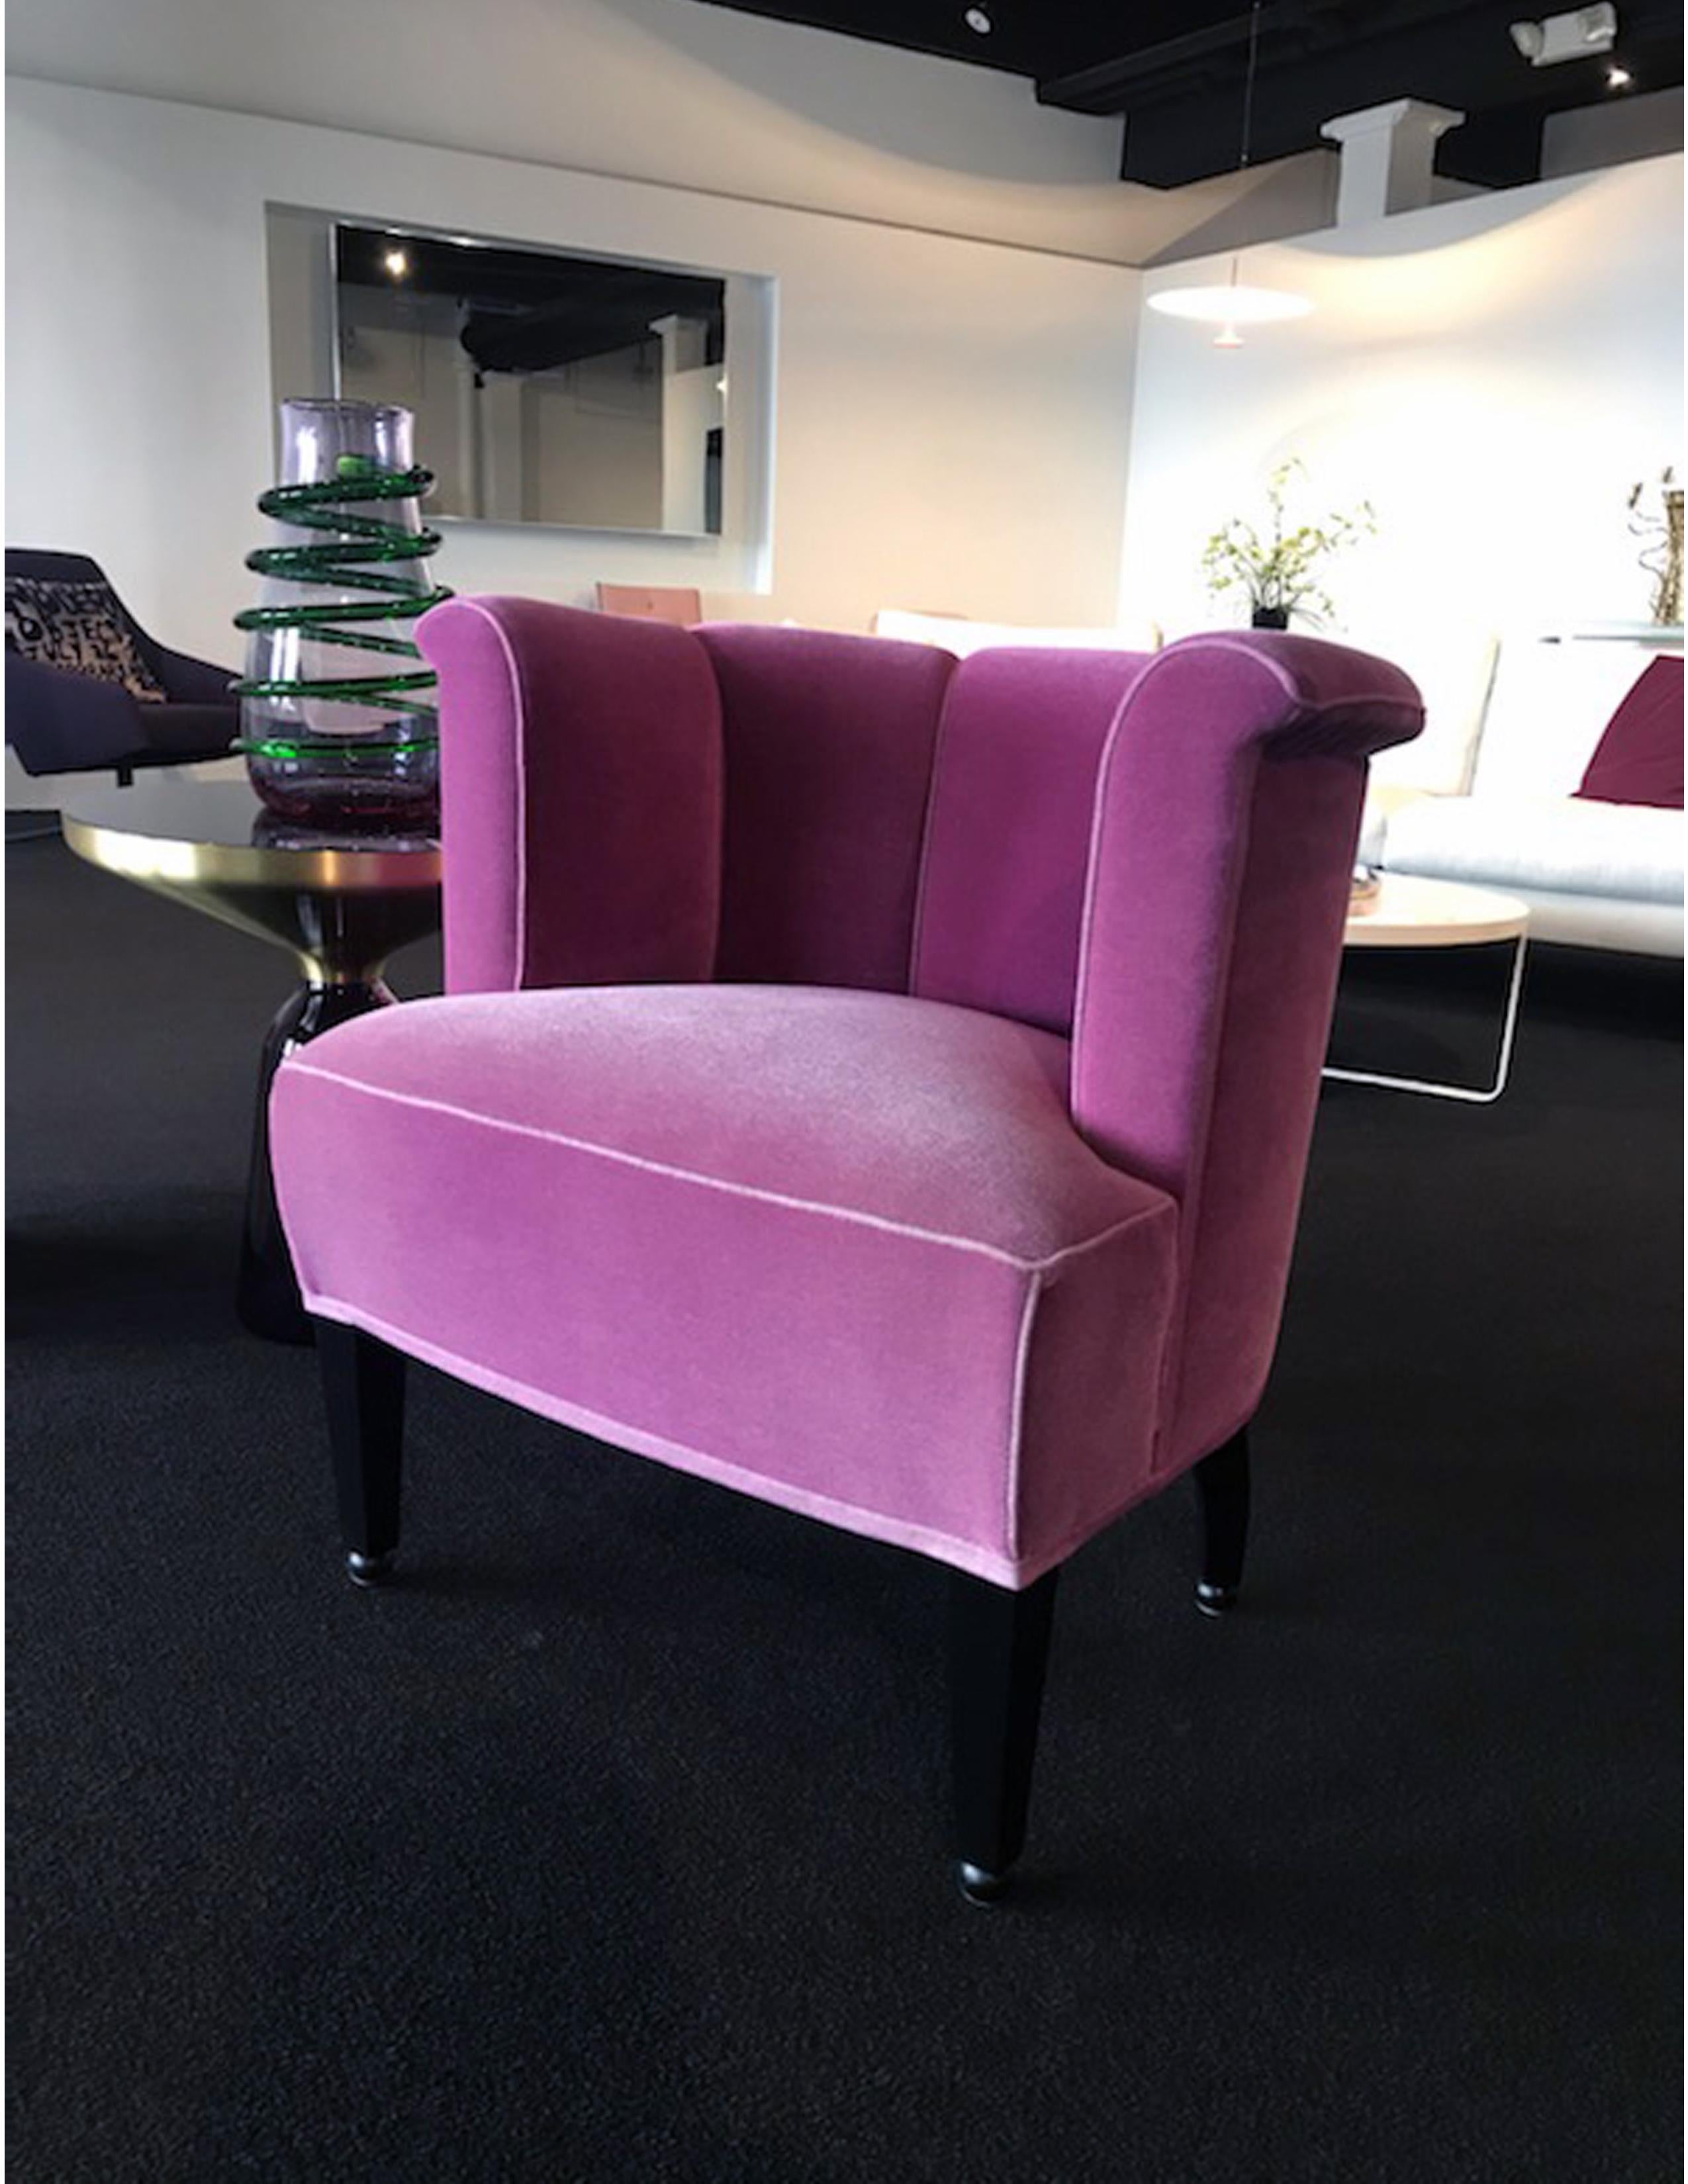 Alleegasse armchair
Upholstered com: designtex mohair plus magenta#3575-605
Contrast piping: loden 3 fuchsia
#S14sl2122
Legs: beech black stained
This upholstered suite was designed in 1912 for Dr. Hugo Koller’s music room as part of the